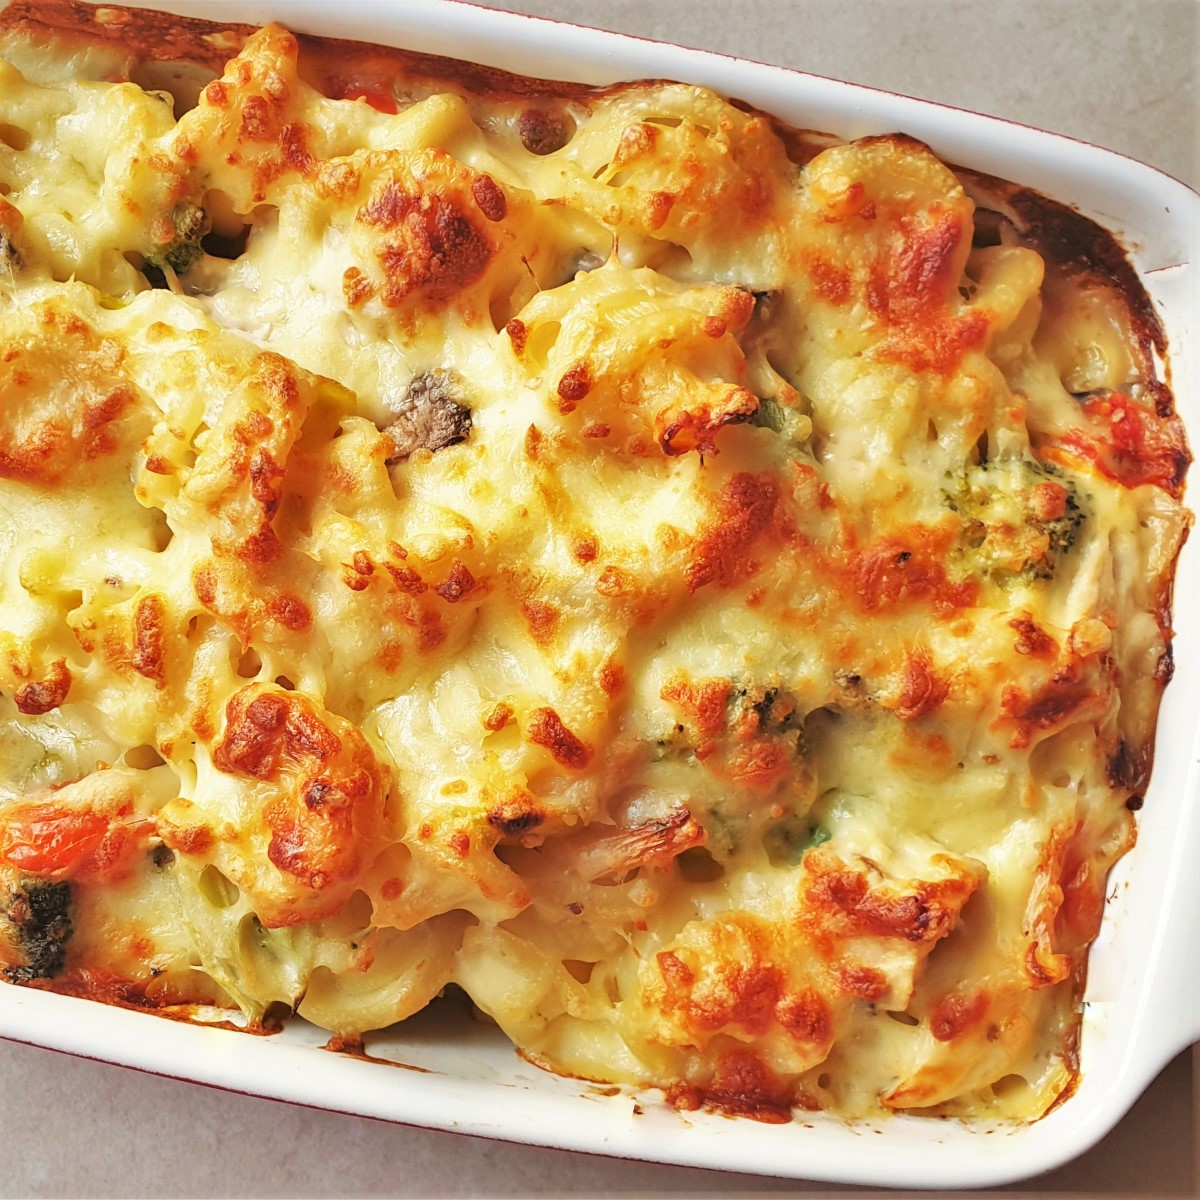 A baked dish of cheesy chicken and vegetable pasta.